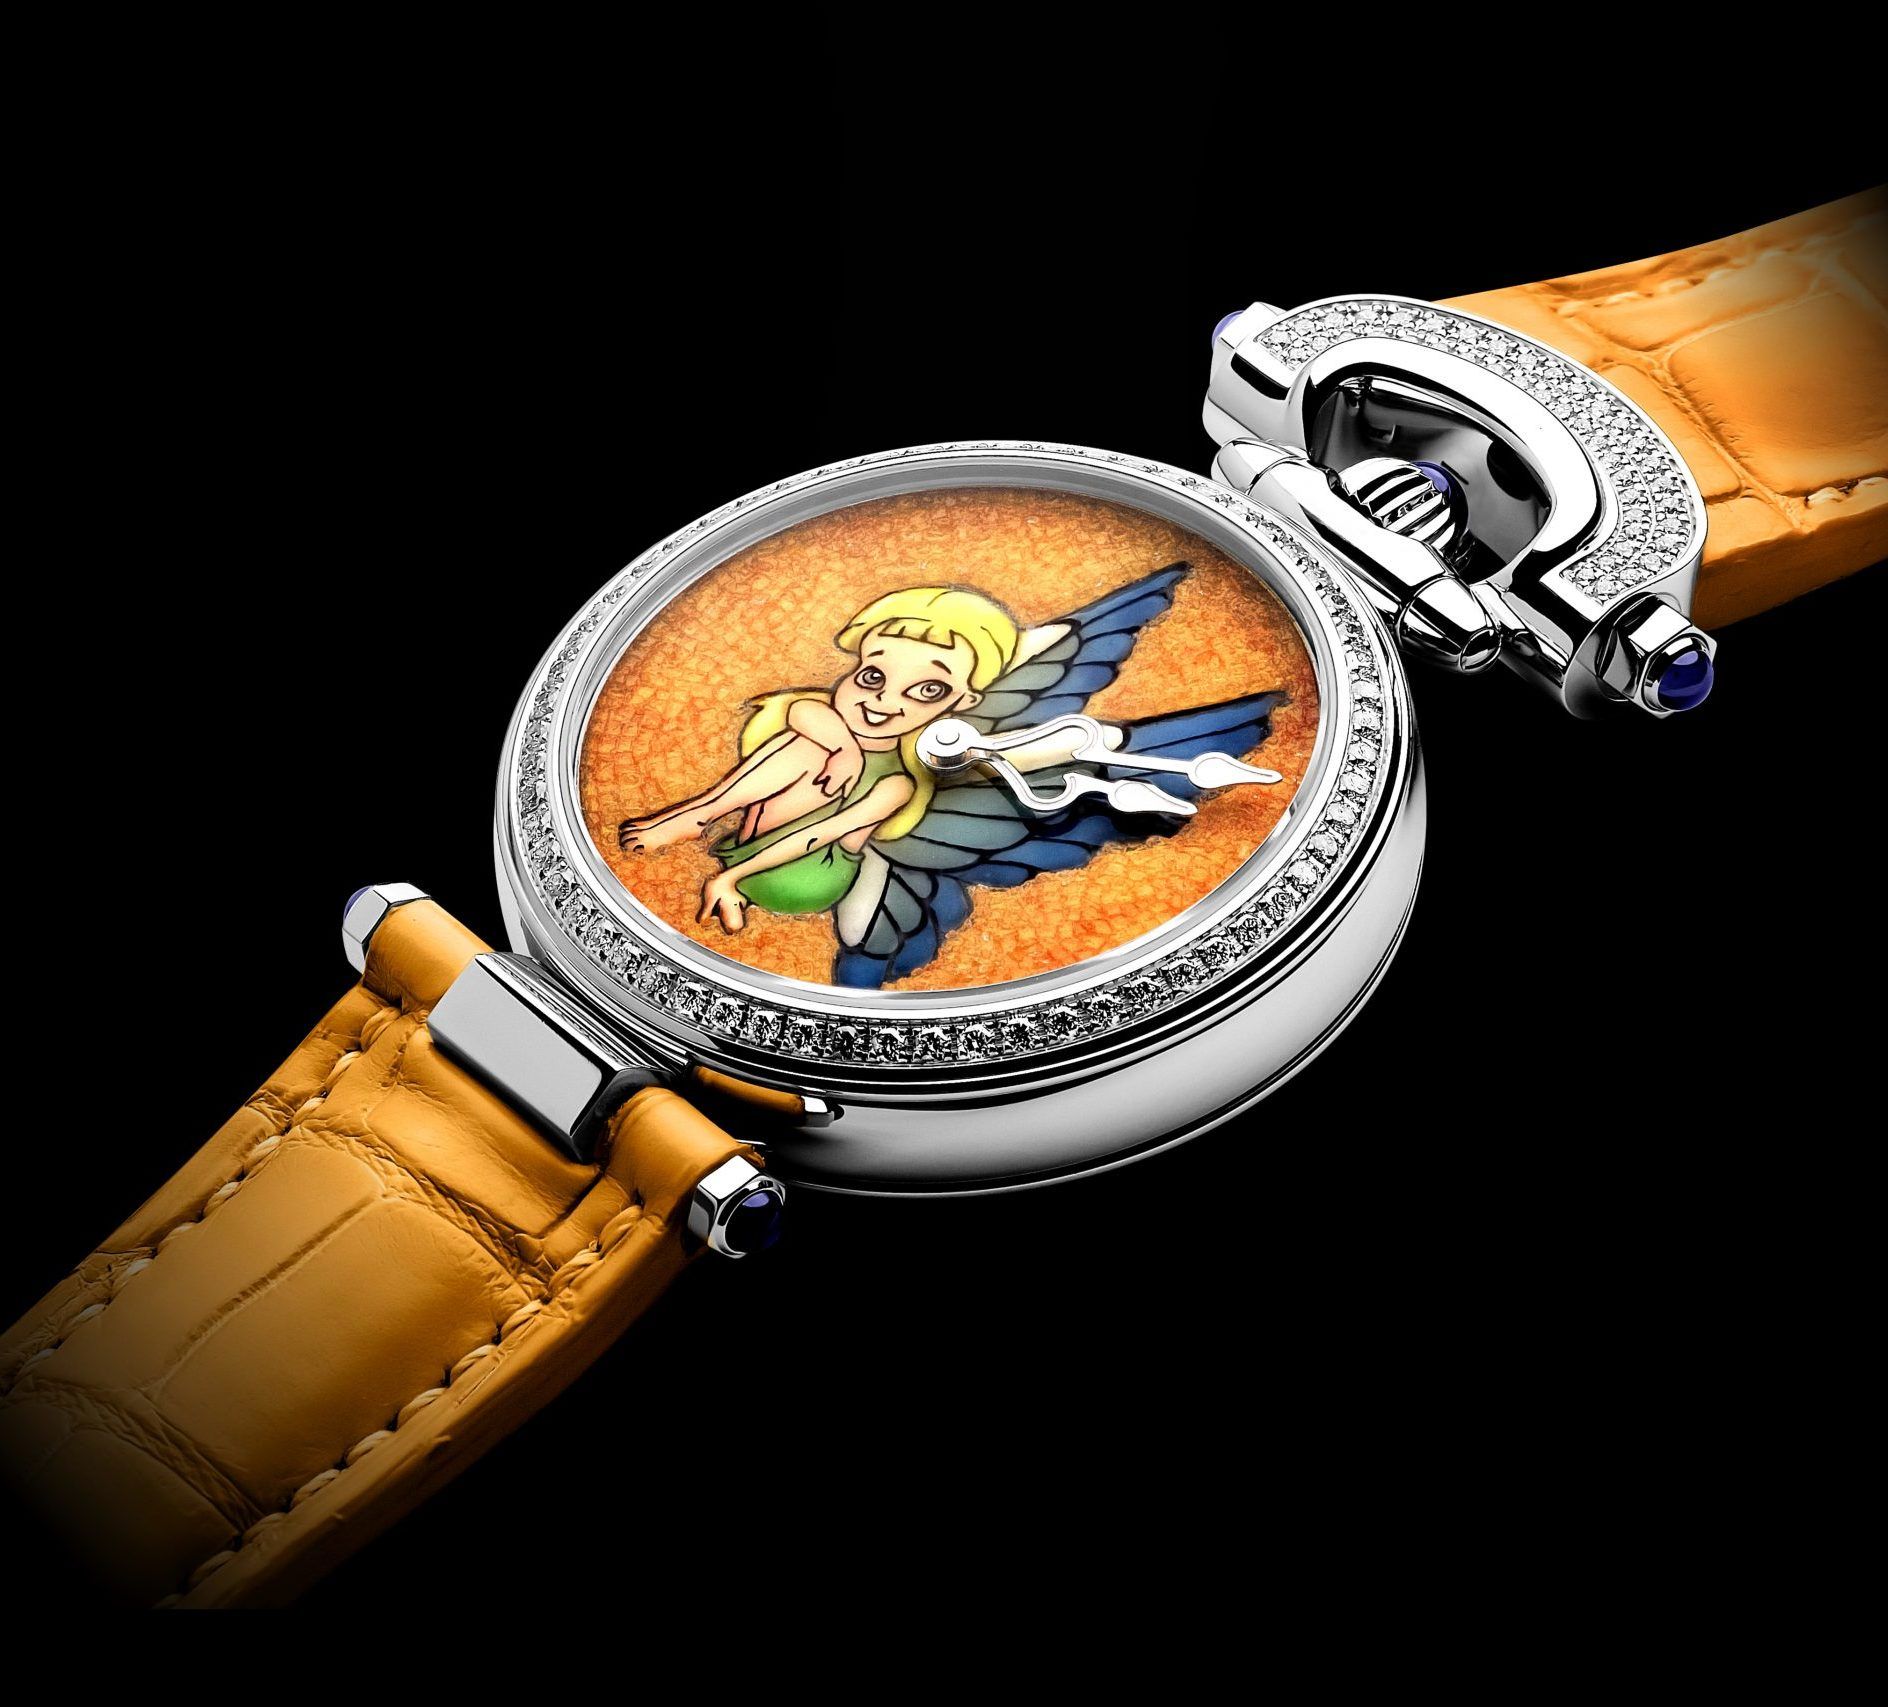 Flaunt nostalgia on your wrist with these quirky vintage cartoon watches